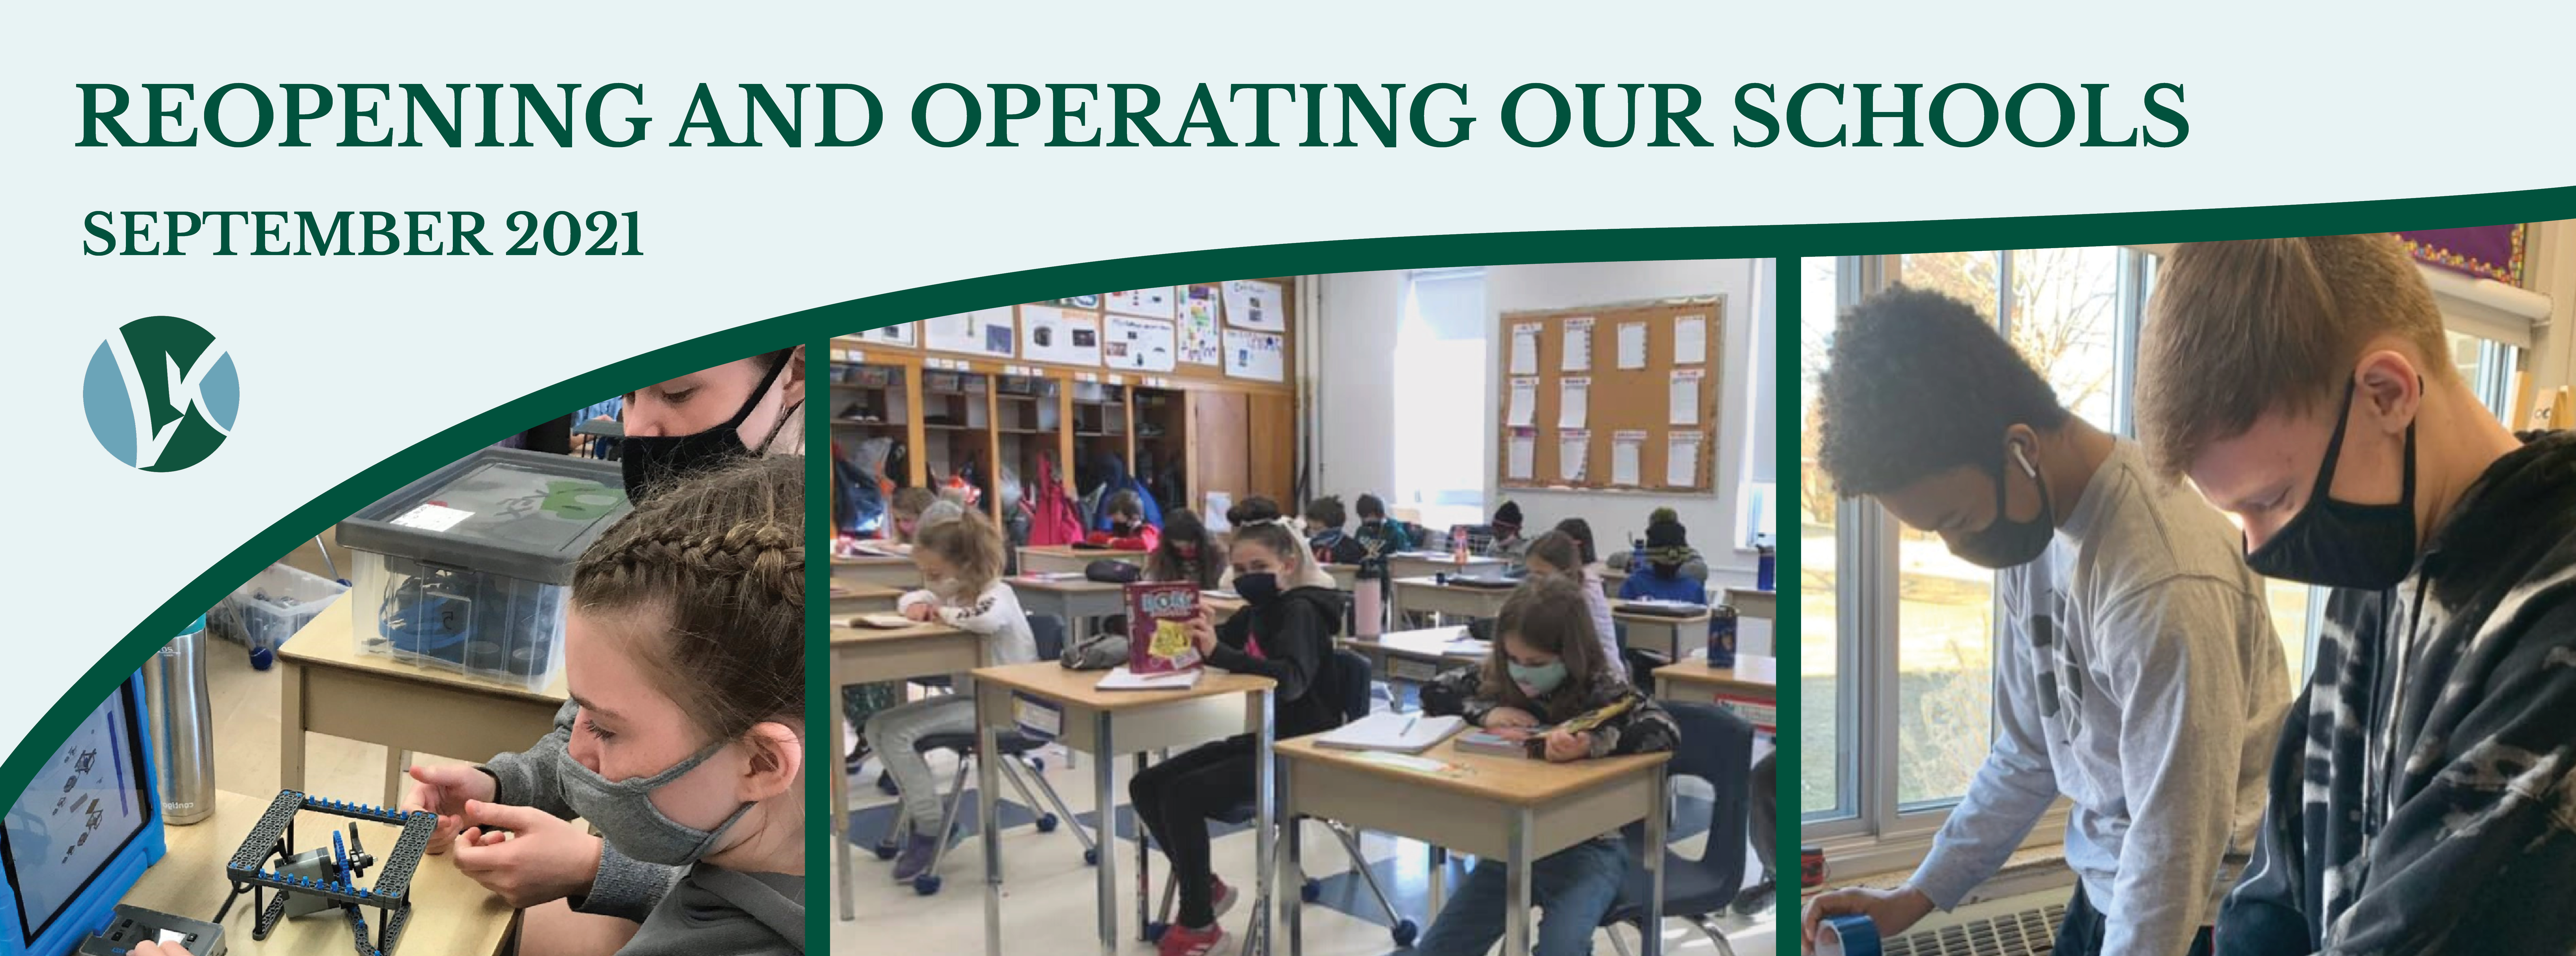 Reopening and Operating Our Schools September 2021